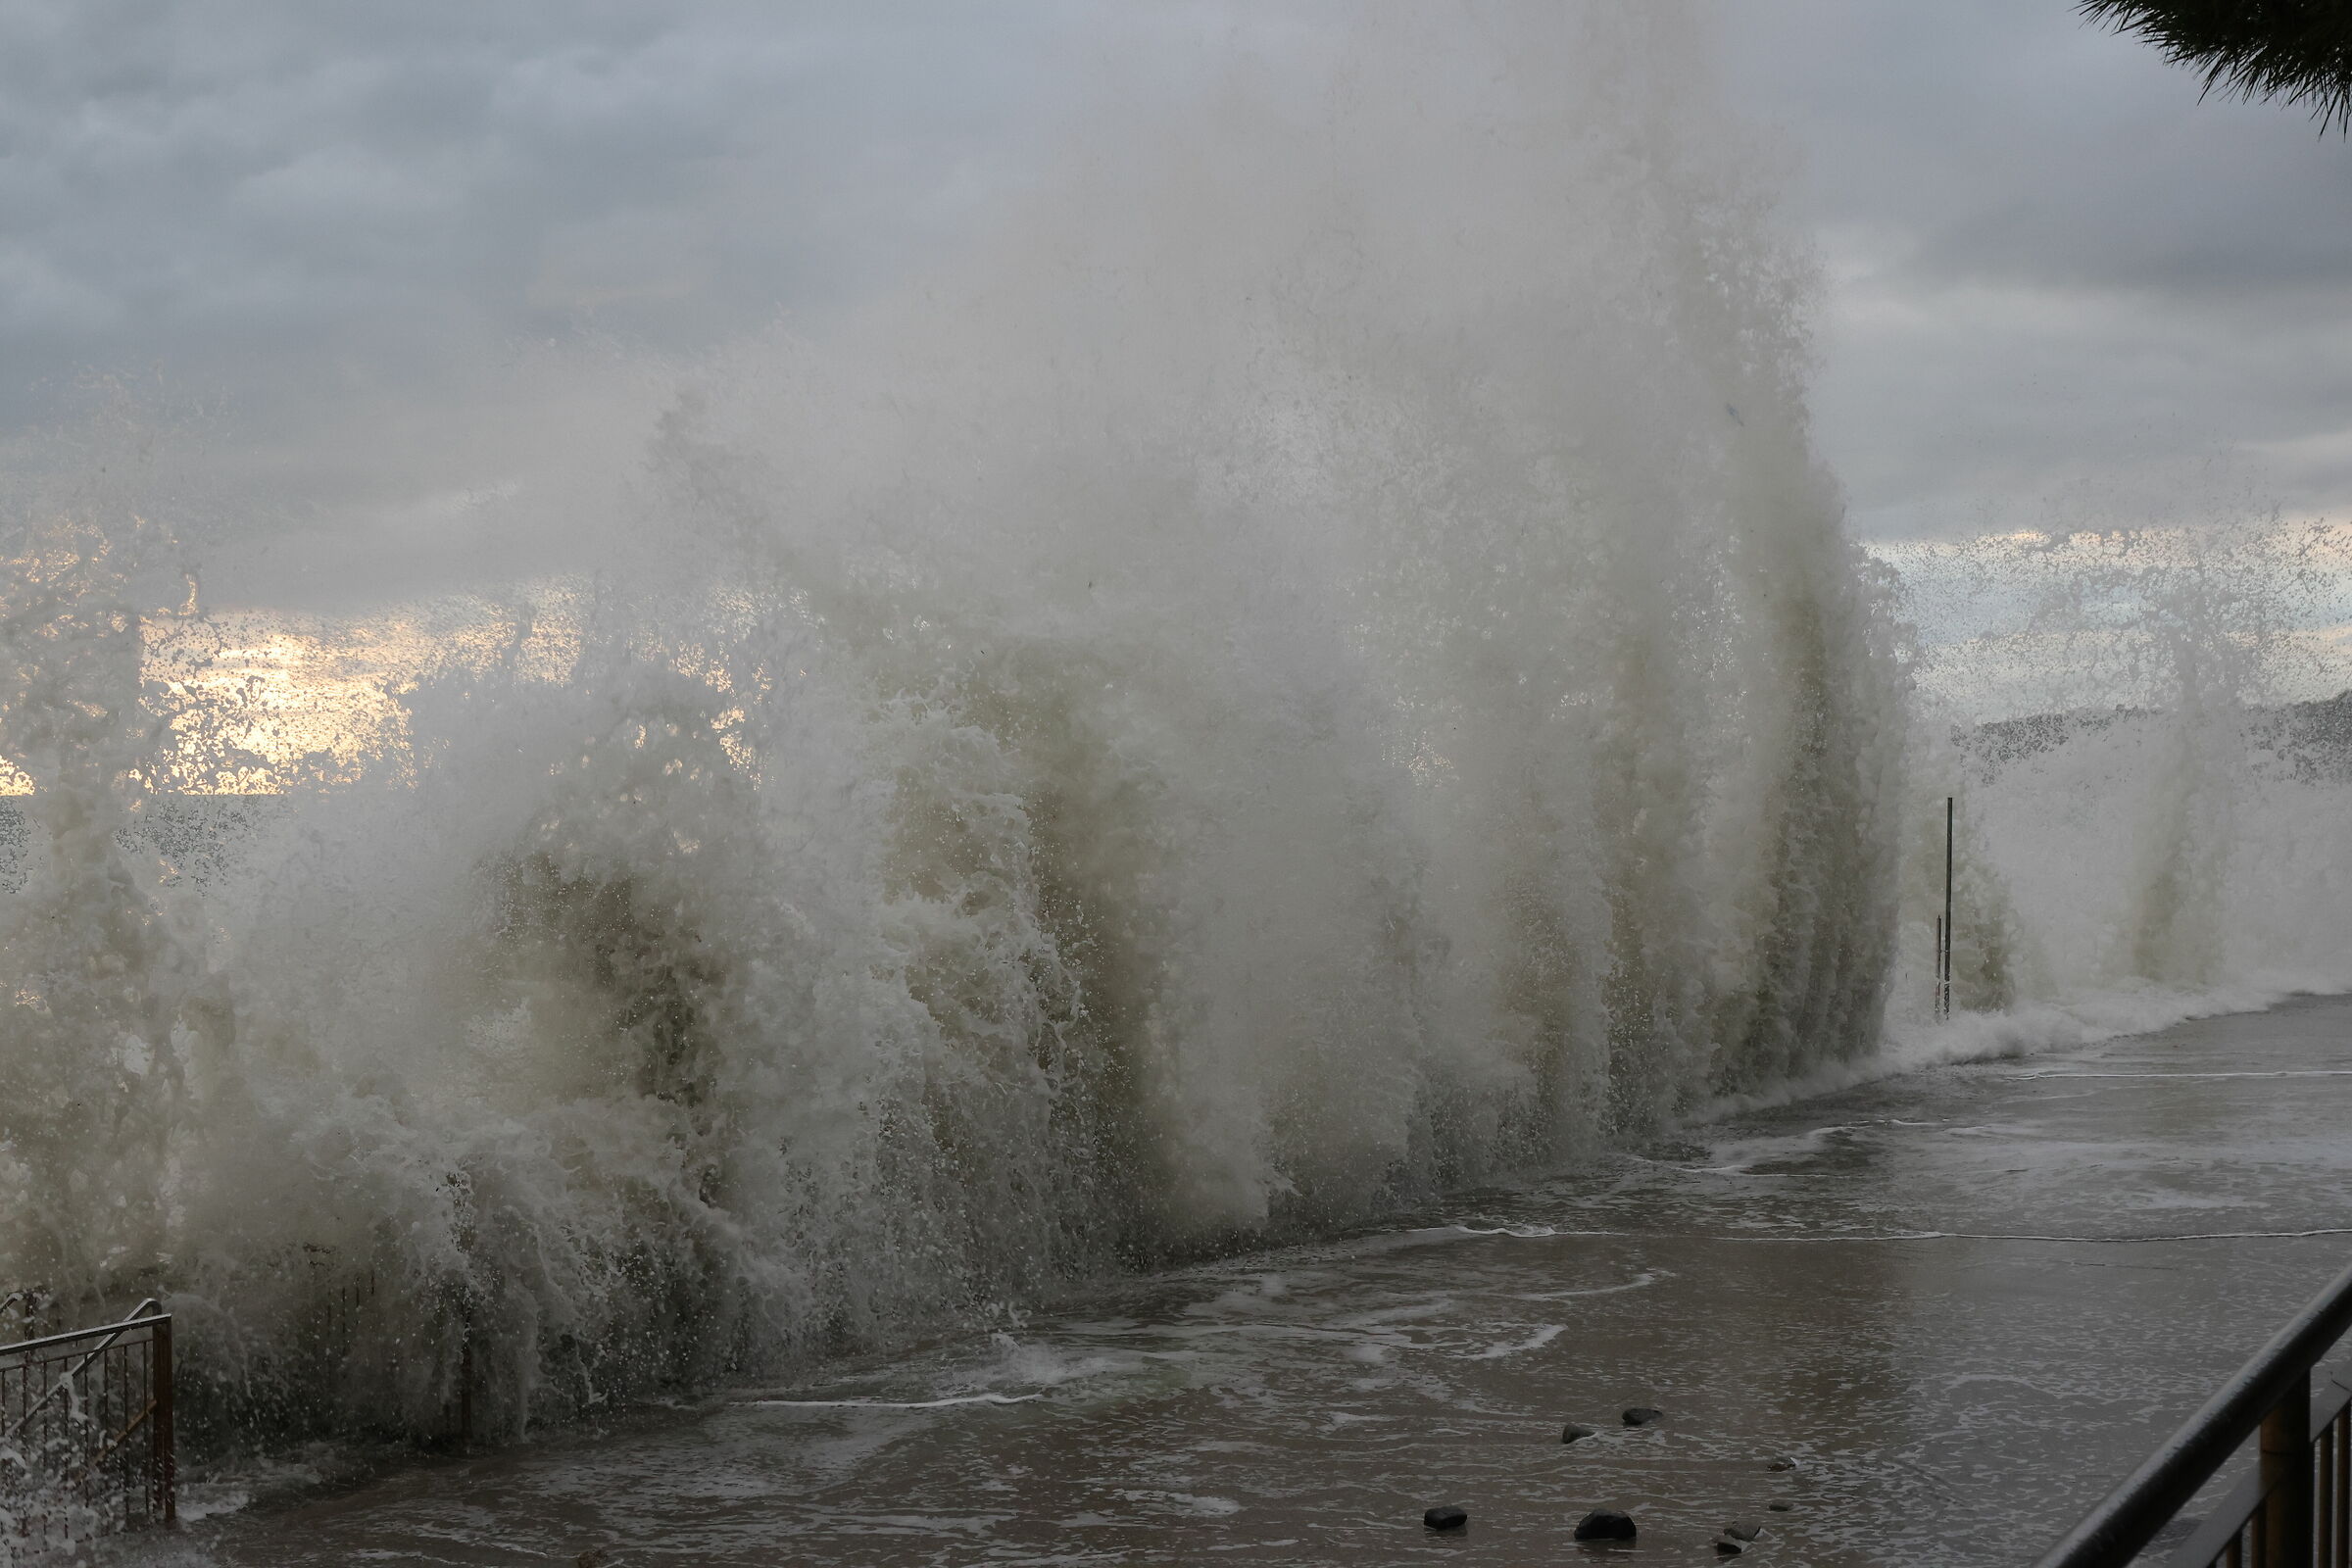 STORM SURGE IN BARCOLA TRIESTE 31 OCTOBER 23...